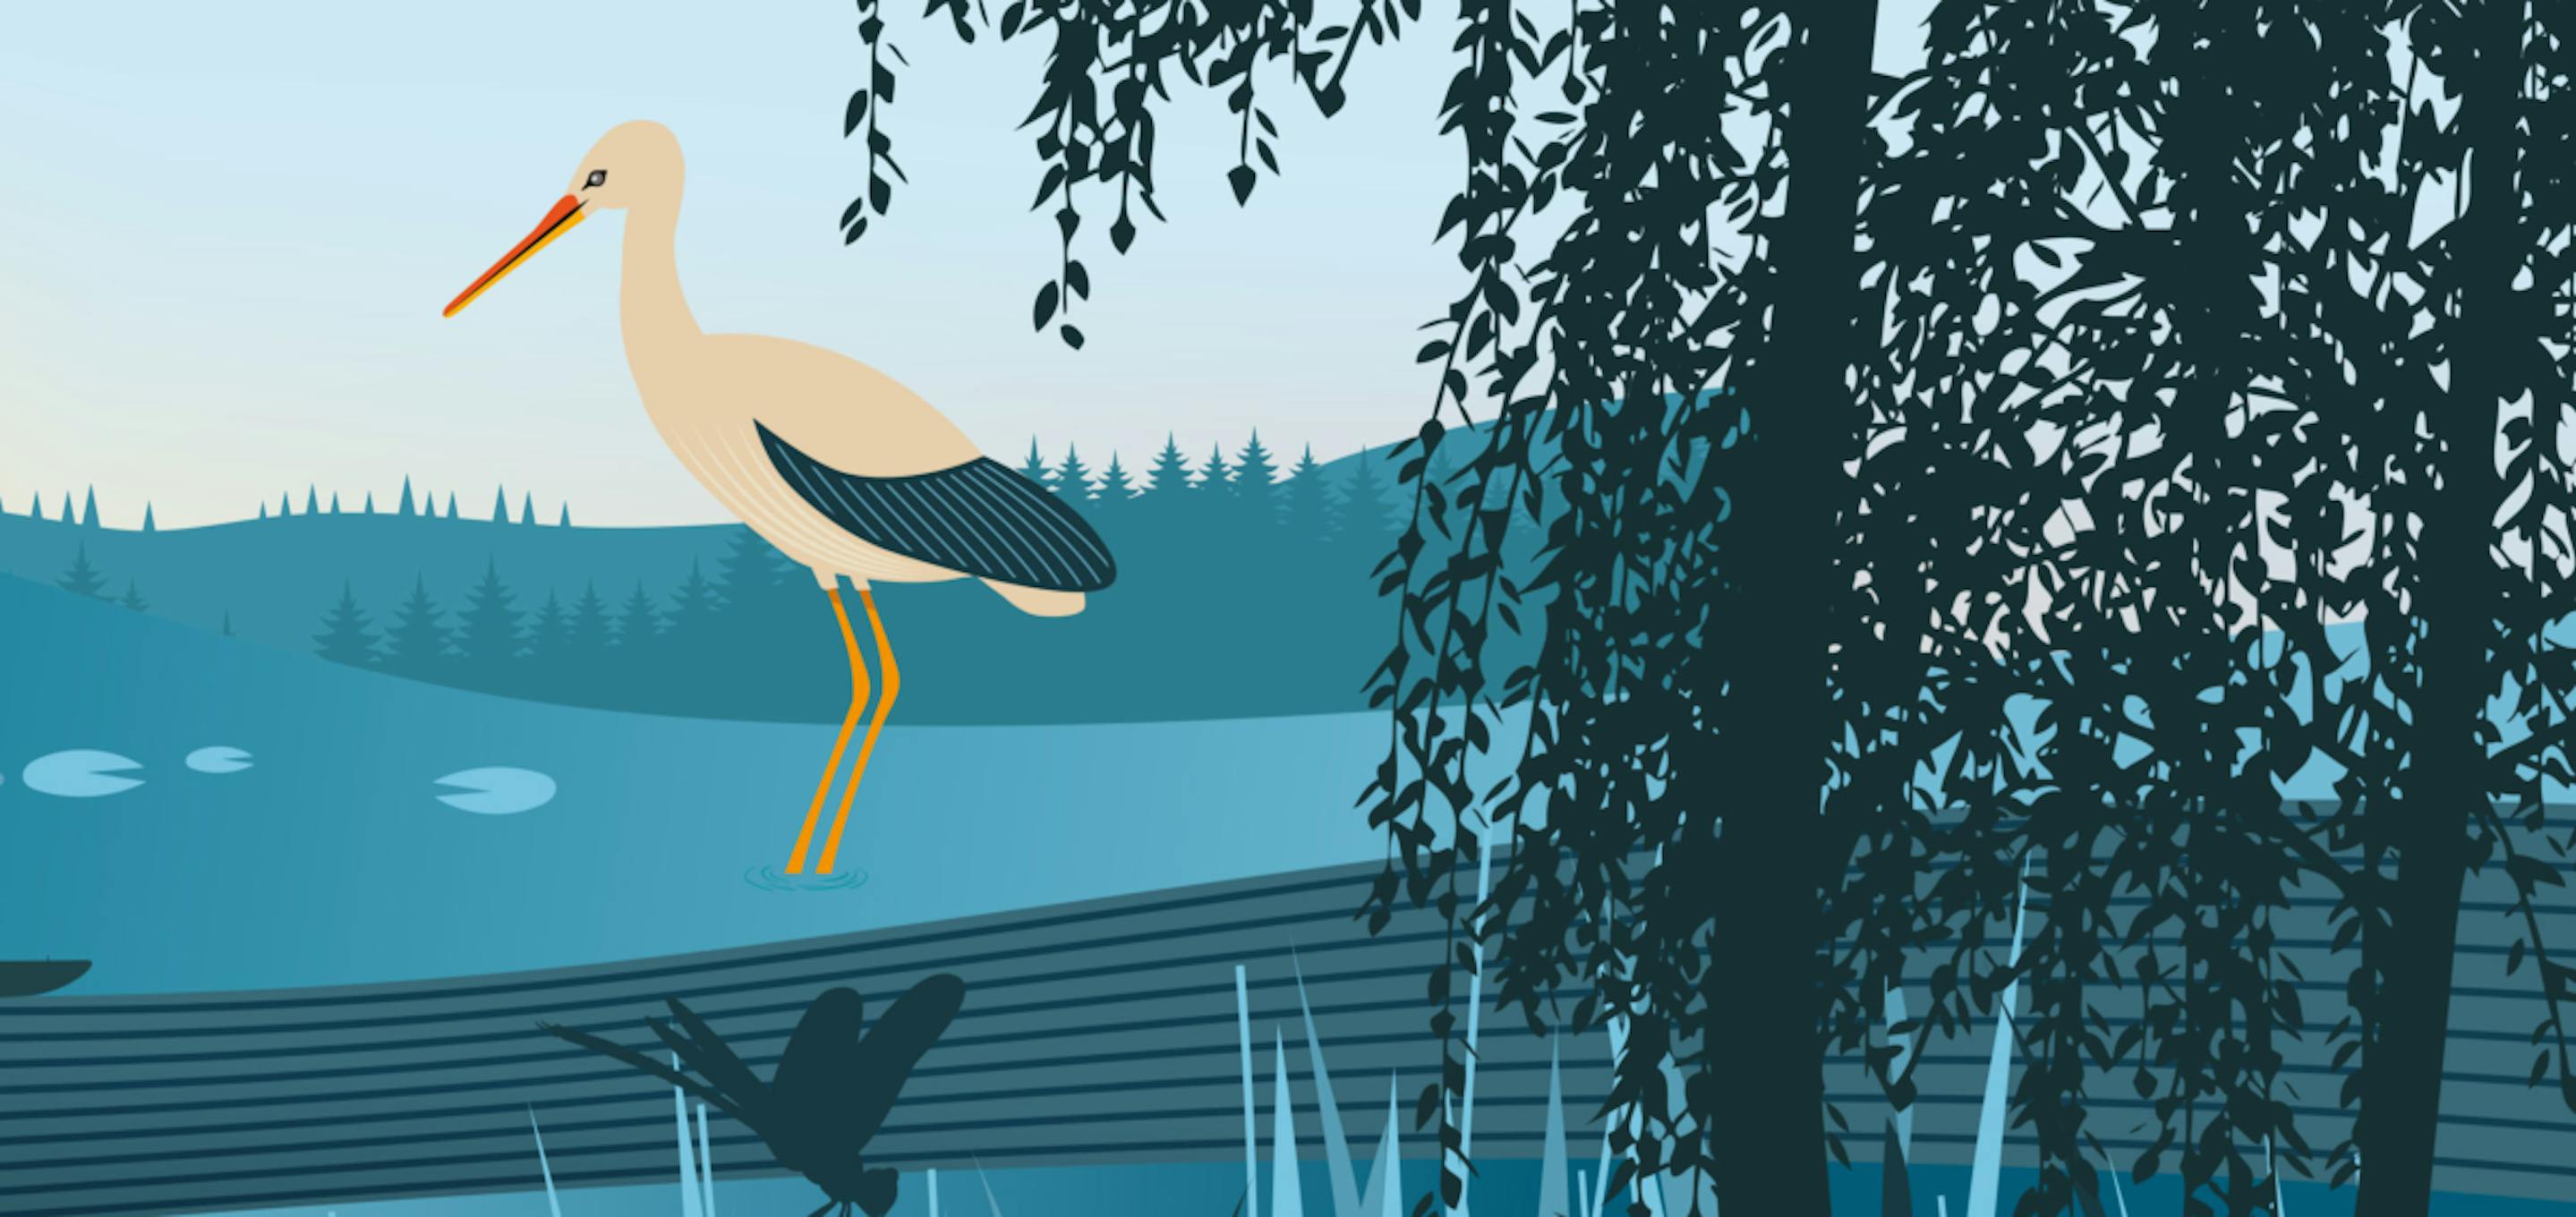 Illustration of a Heron wading in water